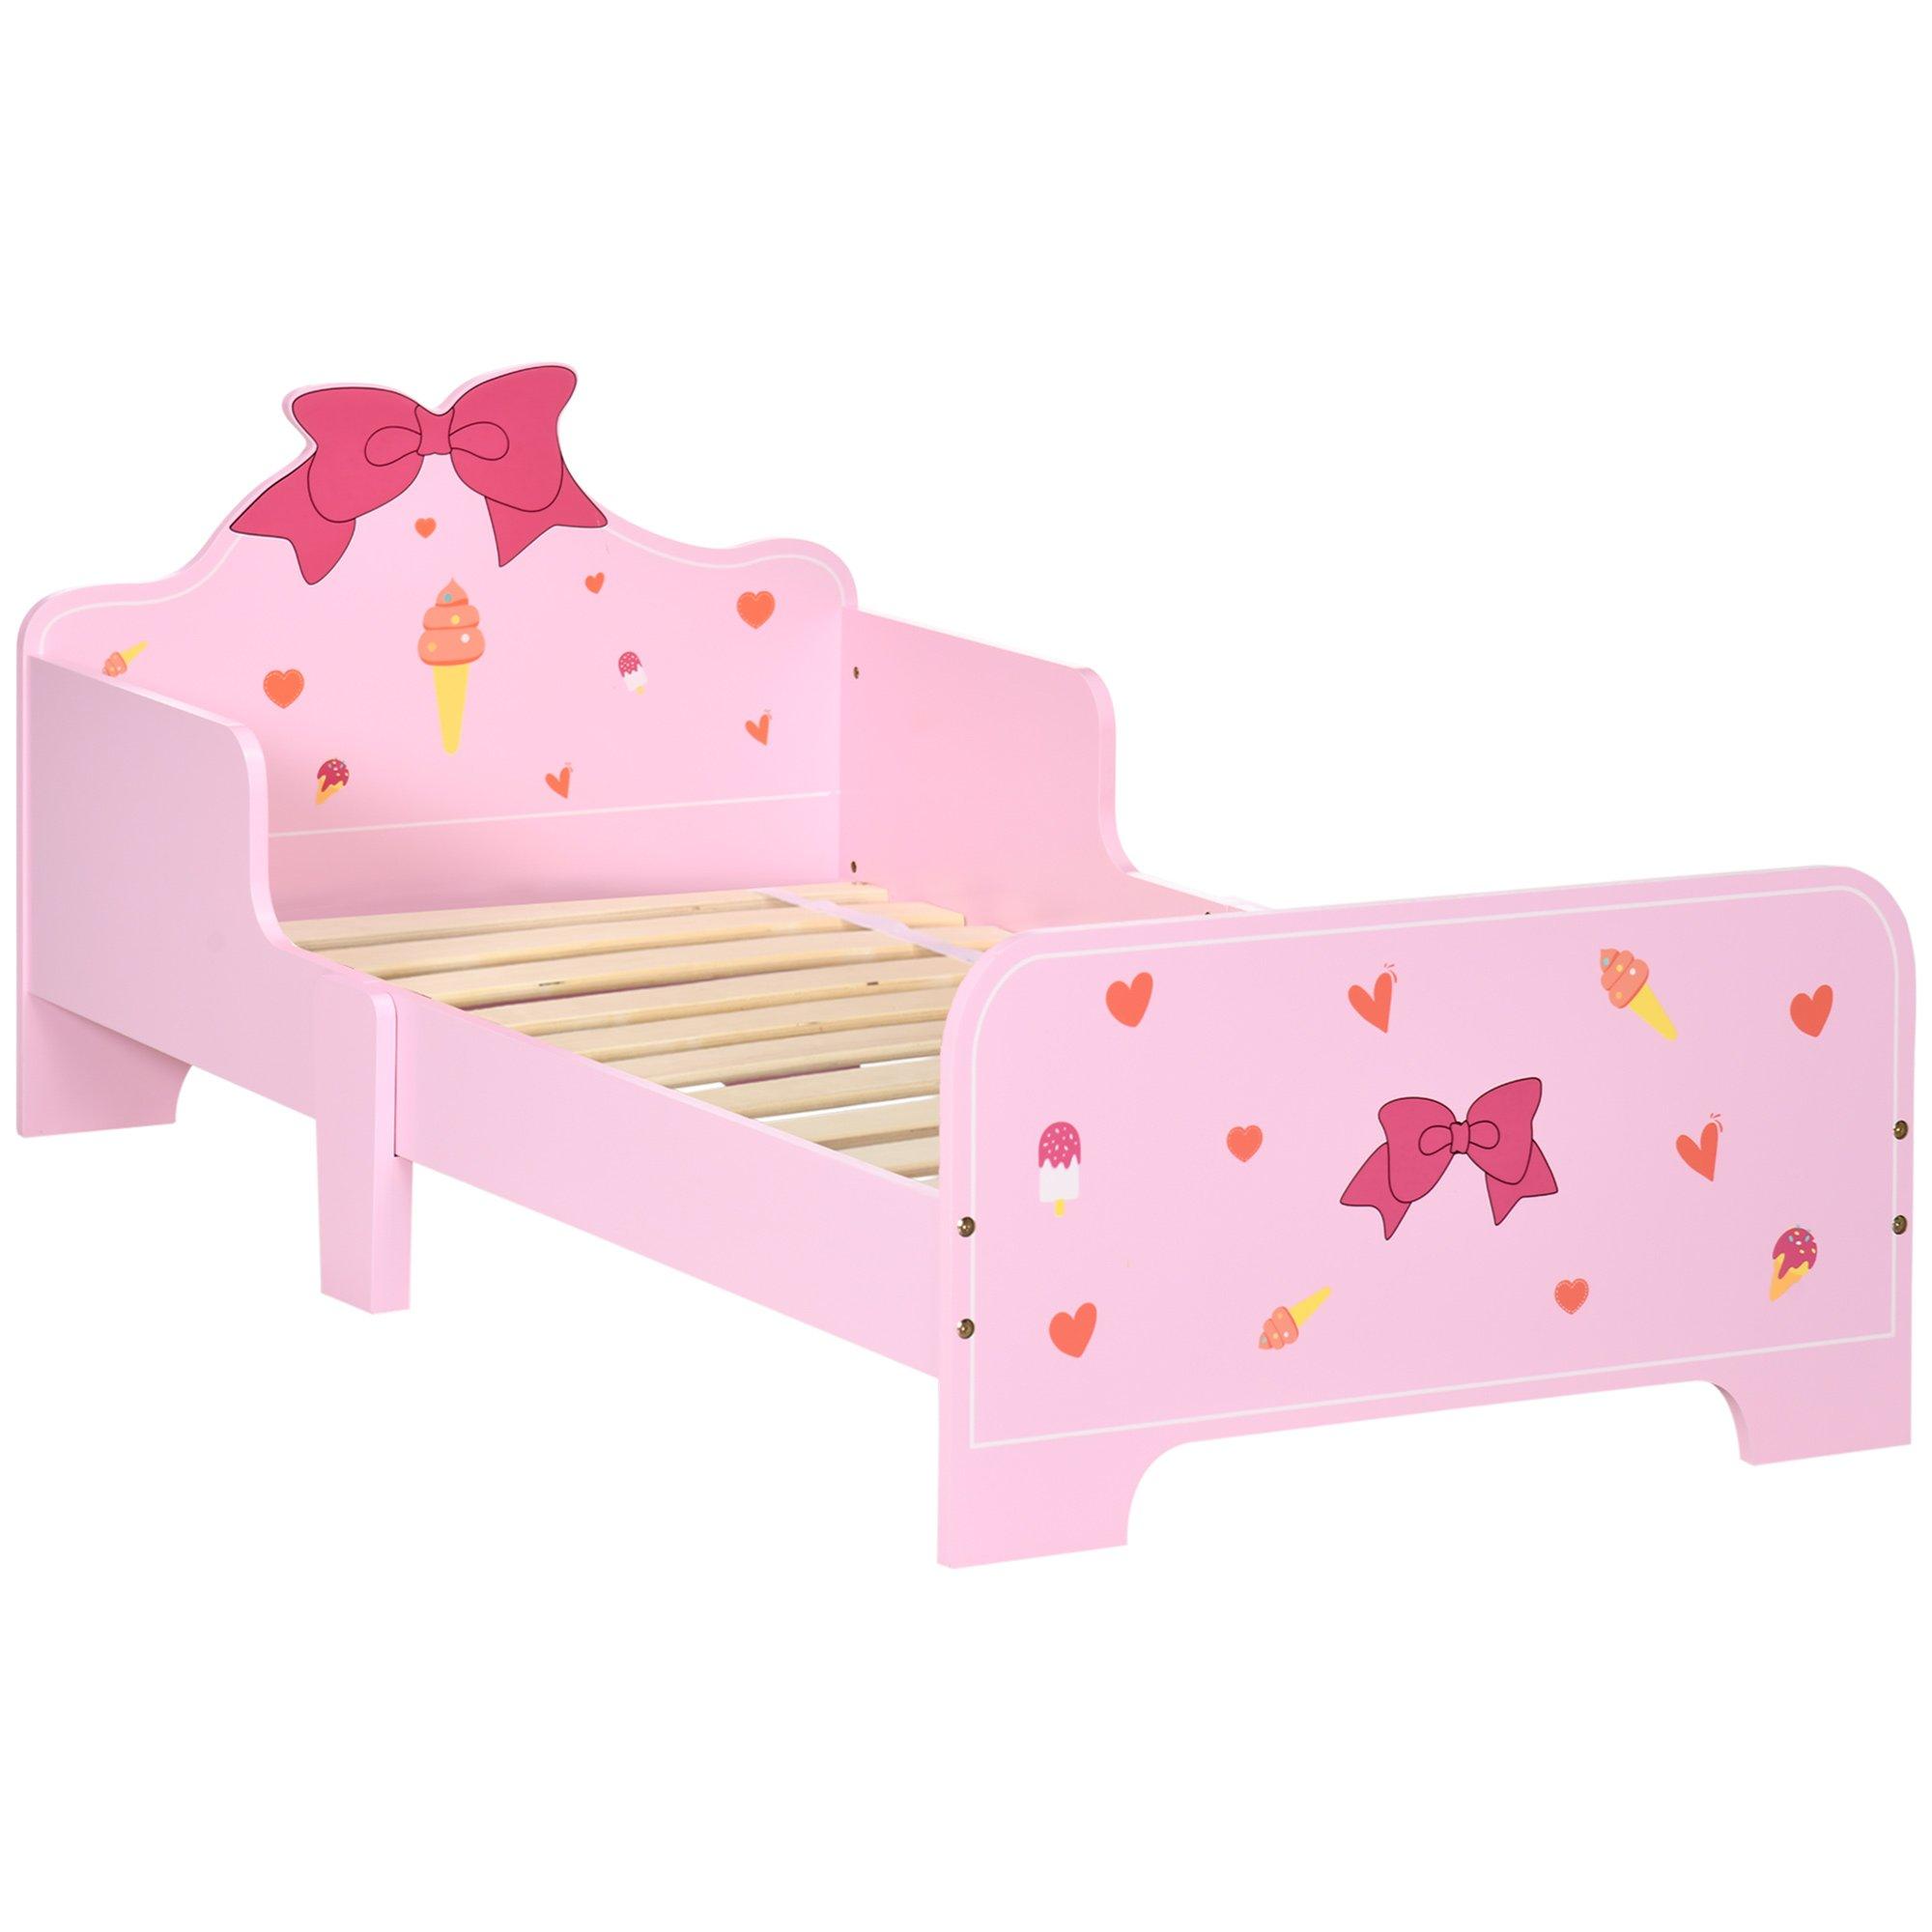 Princess-Themed Kids Toddler Bed with Cute Patterns, Safety Rails - Pink